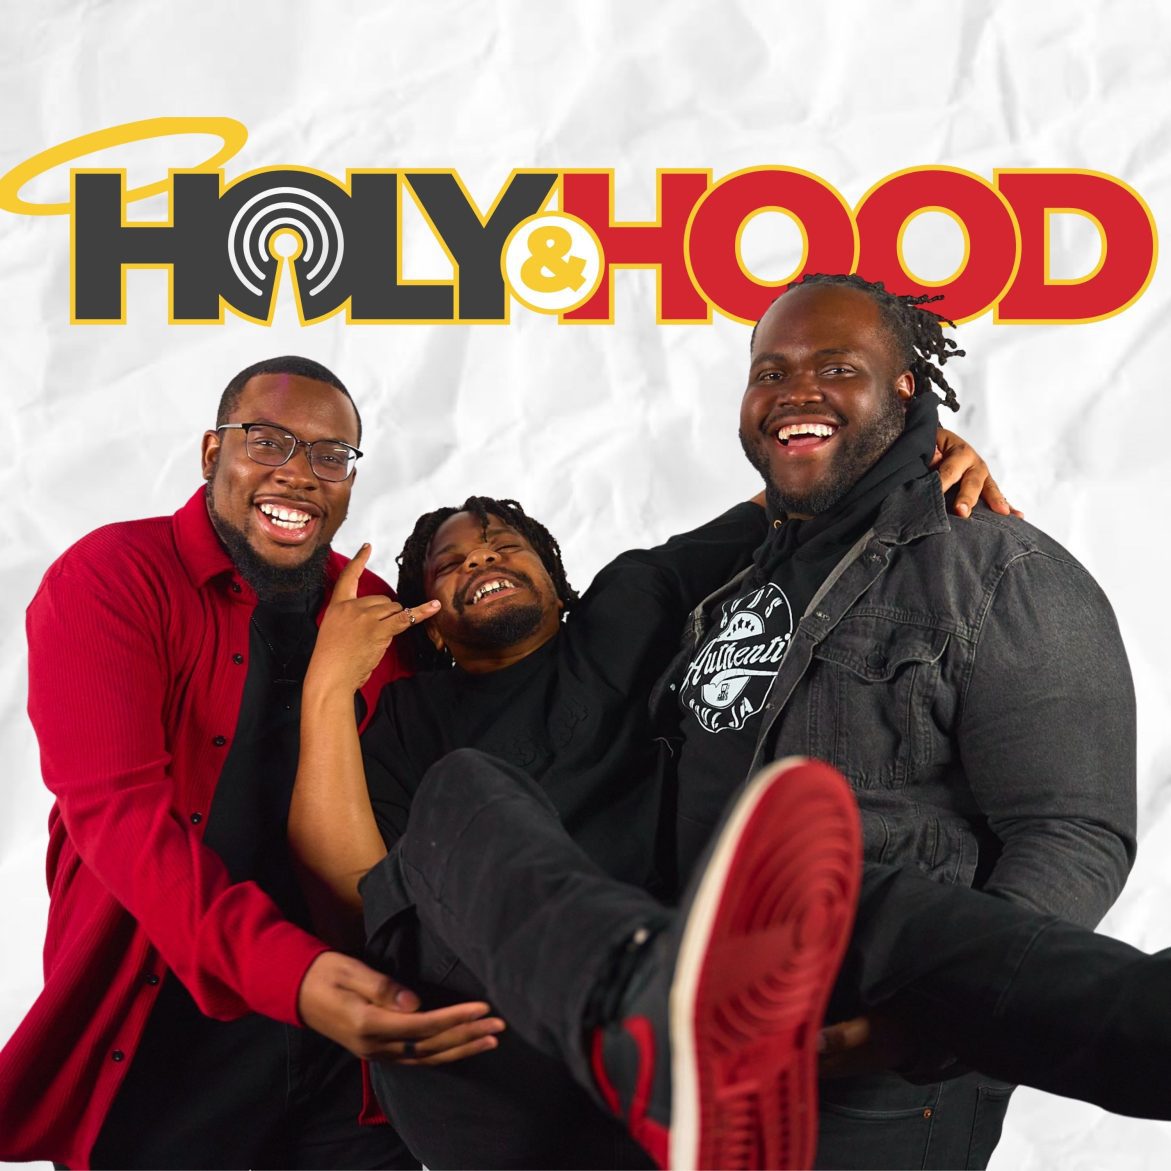 Black Podcasting - Holy and Hood Podcast Episode 009 | Rolling Loud in Faith